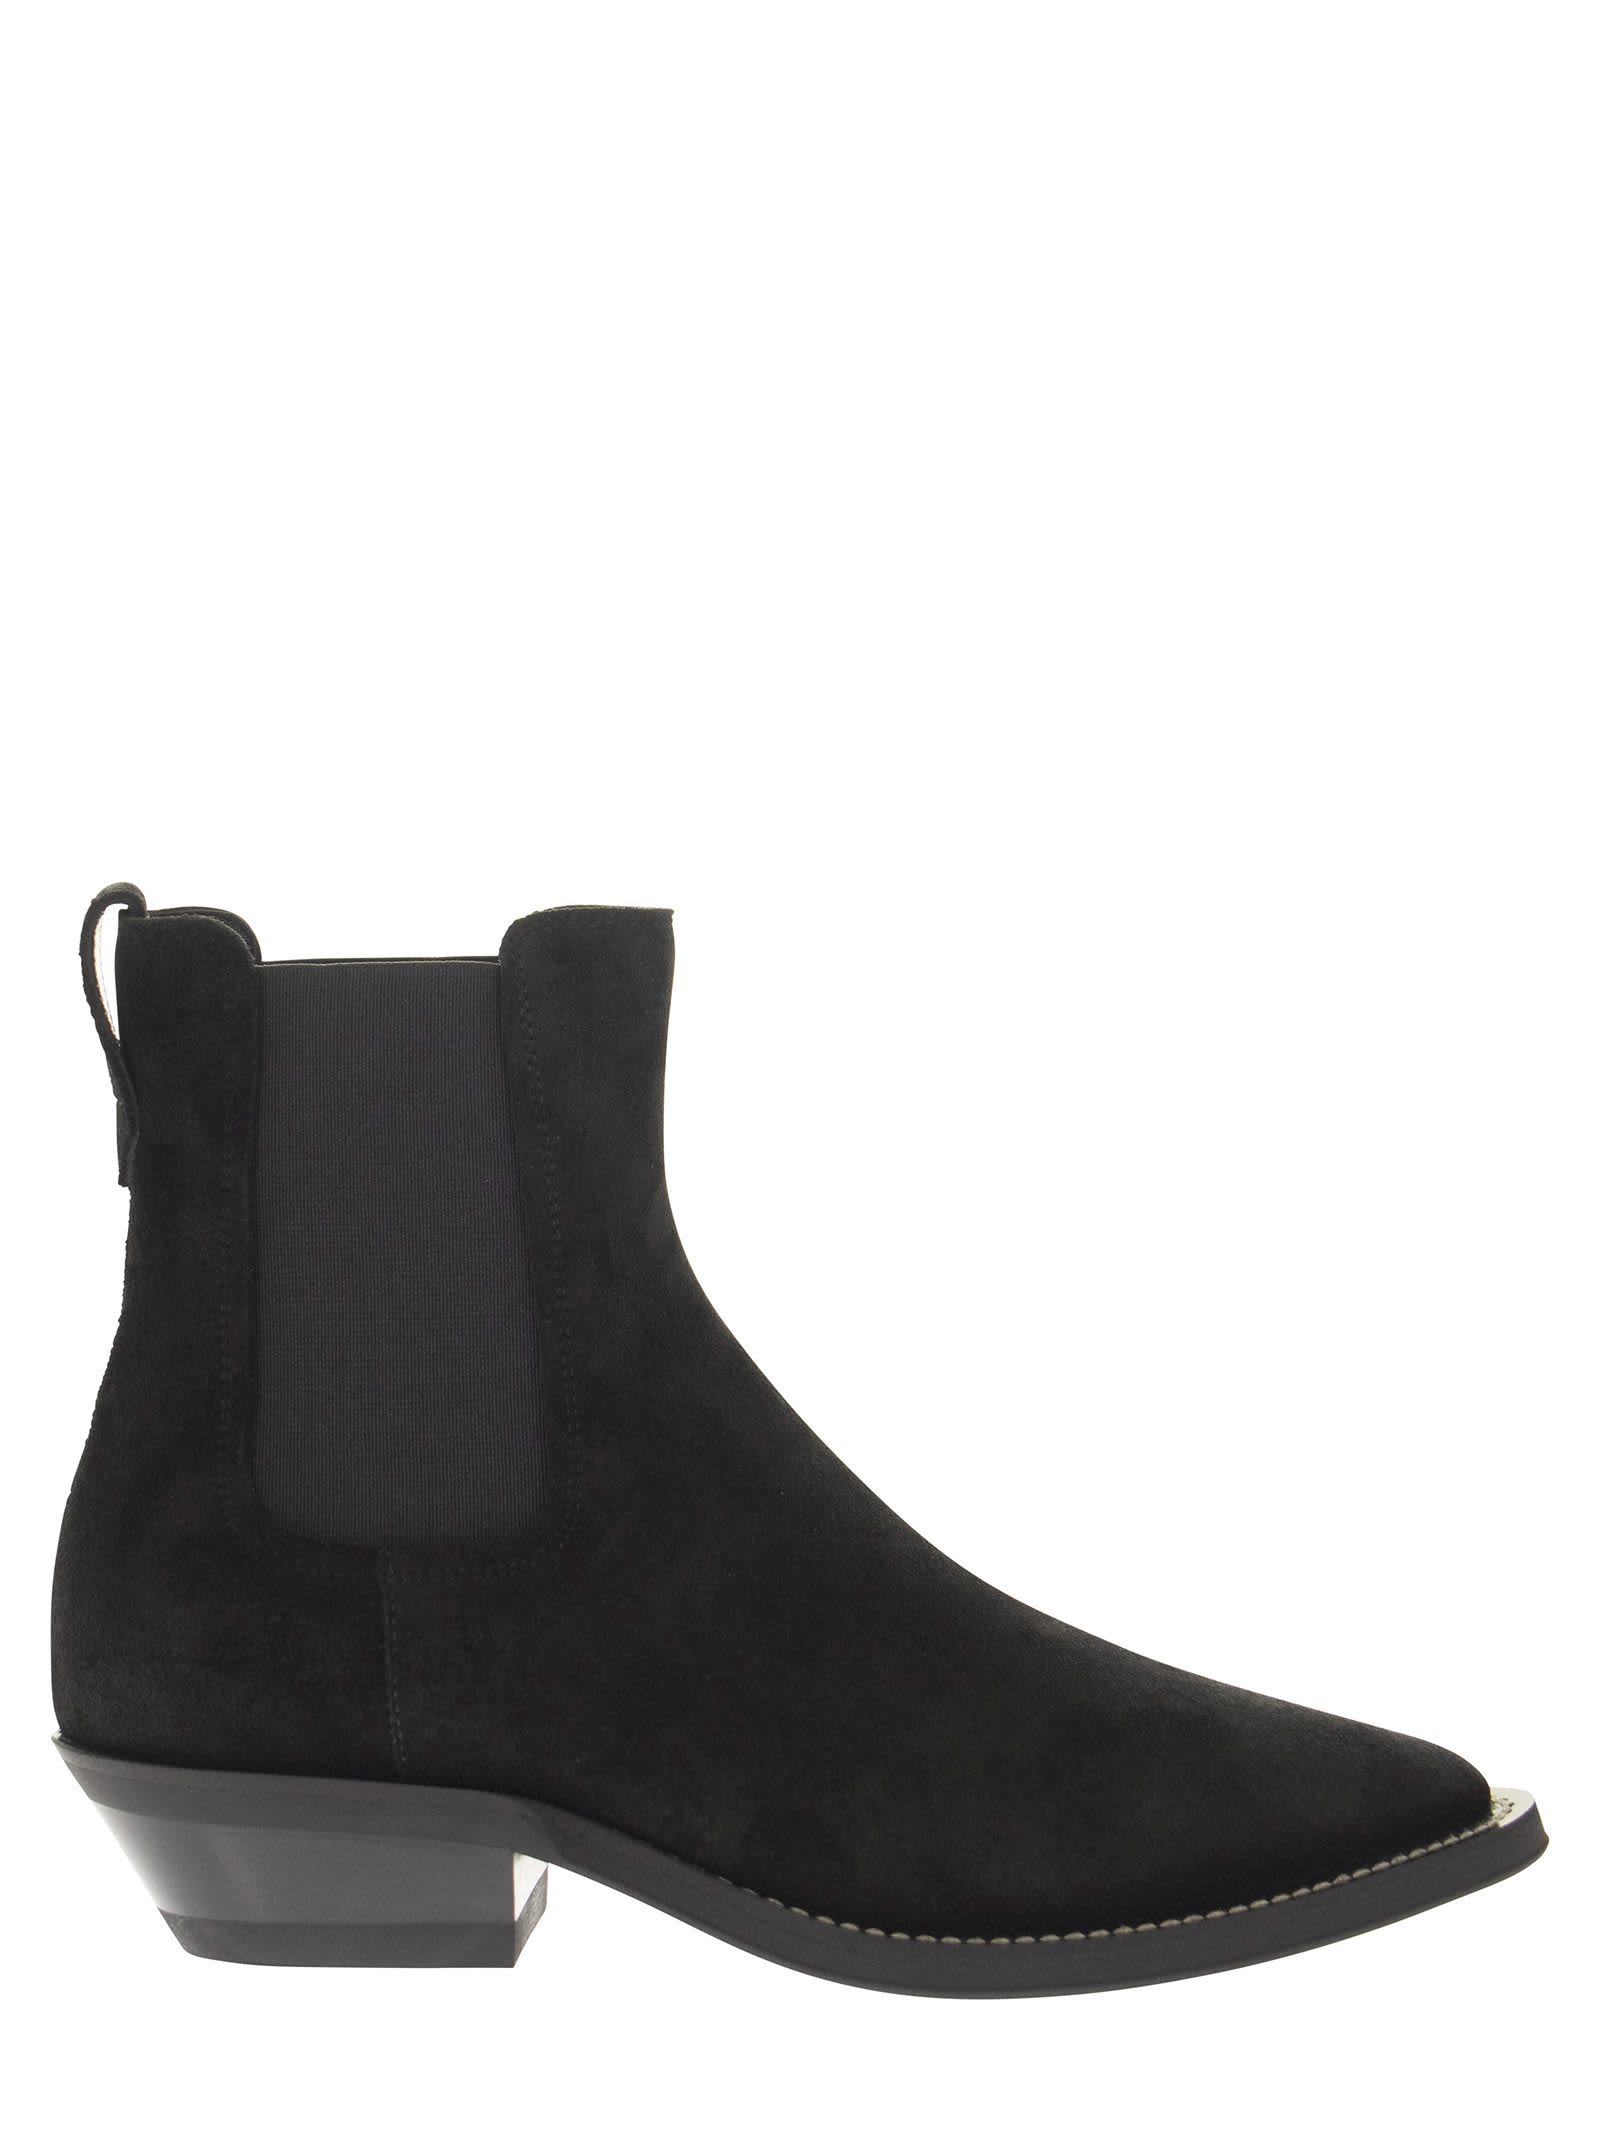 TOD'S SUEDE ANKLE BOOT,XXW04I0EV10RE0B999